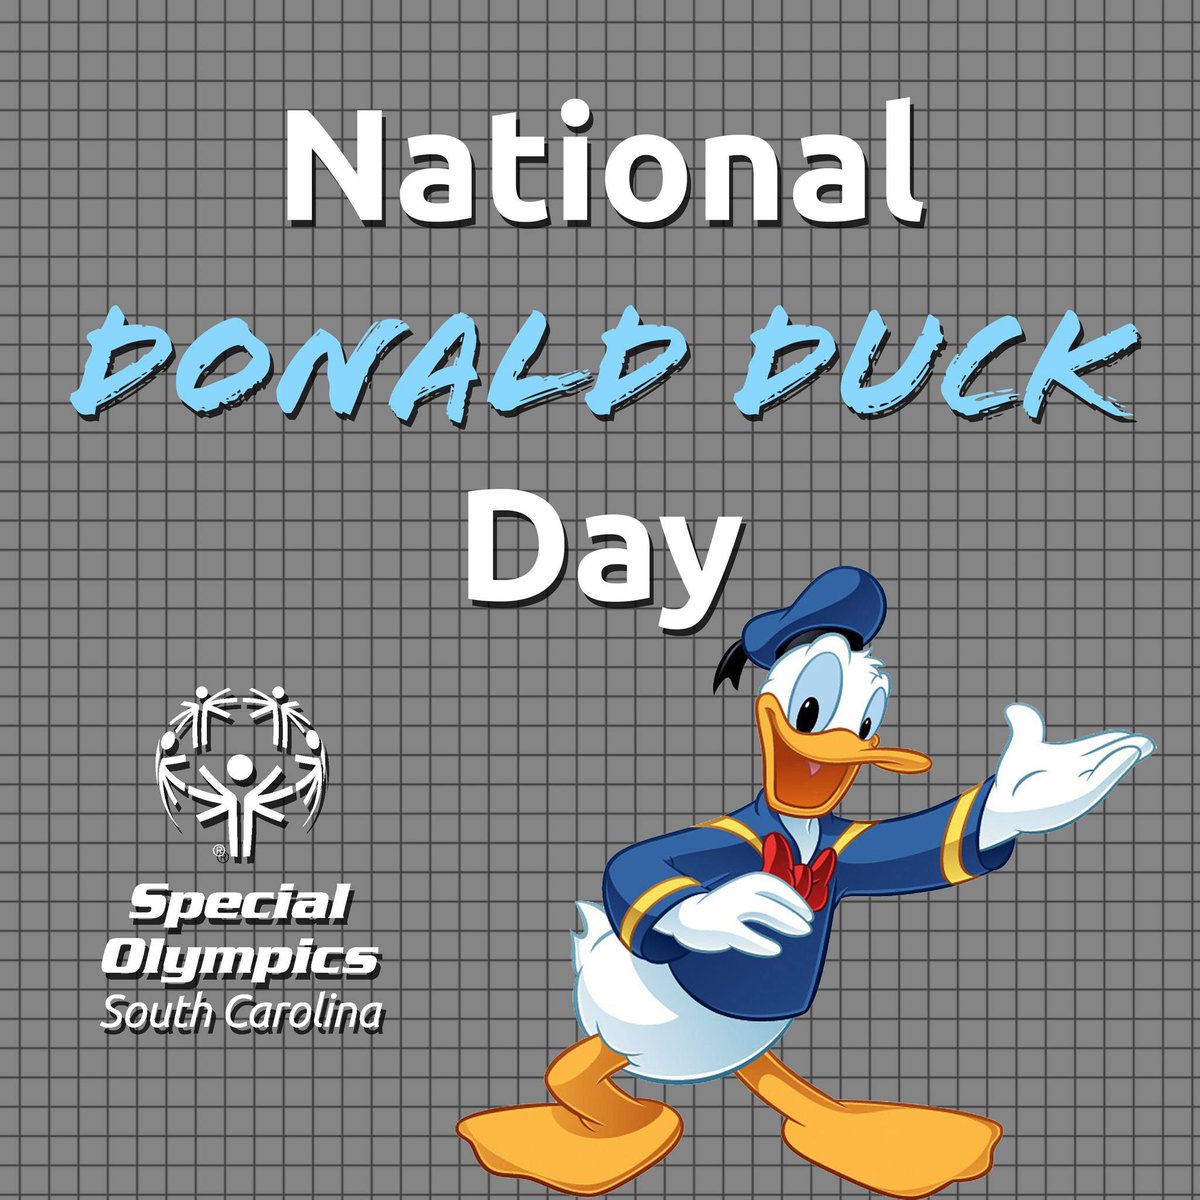 For all of our people at the #2022USAGames, if you see that silly Donald Duck, be sure to celebrate his day with him! #DonaldDuckDay #NationalDonaldDuckDay